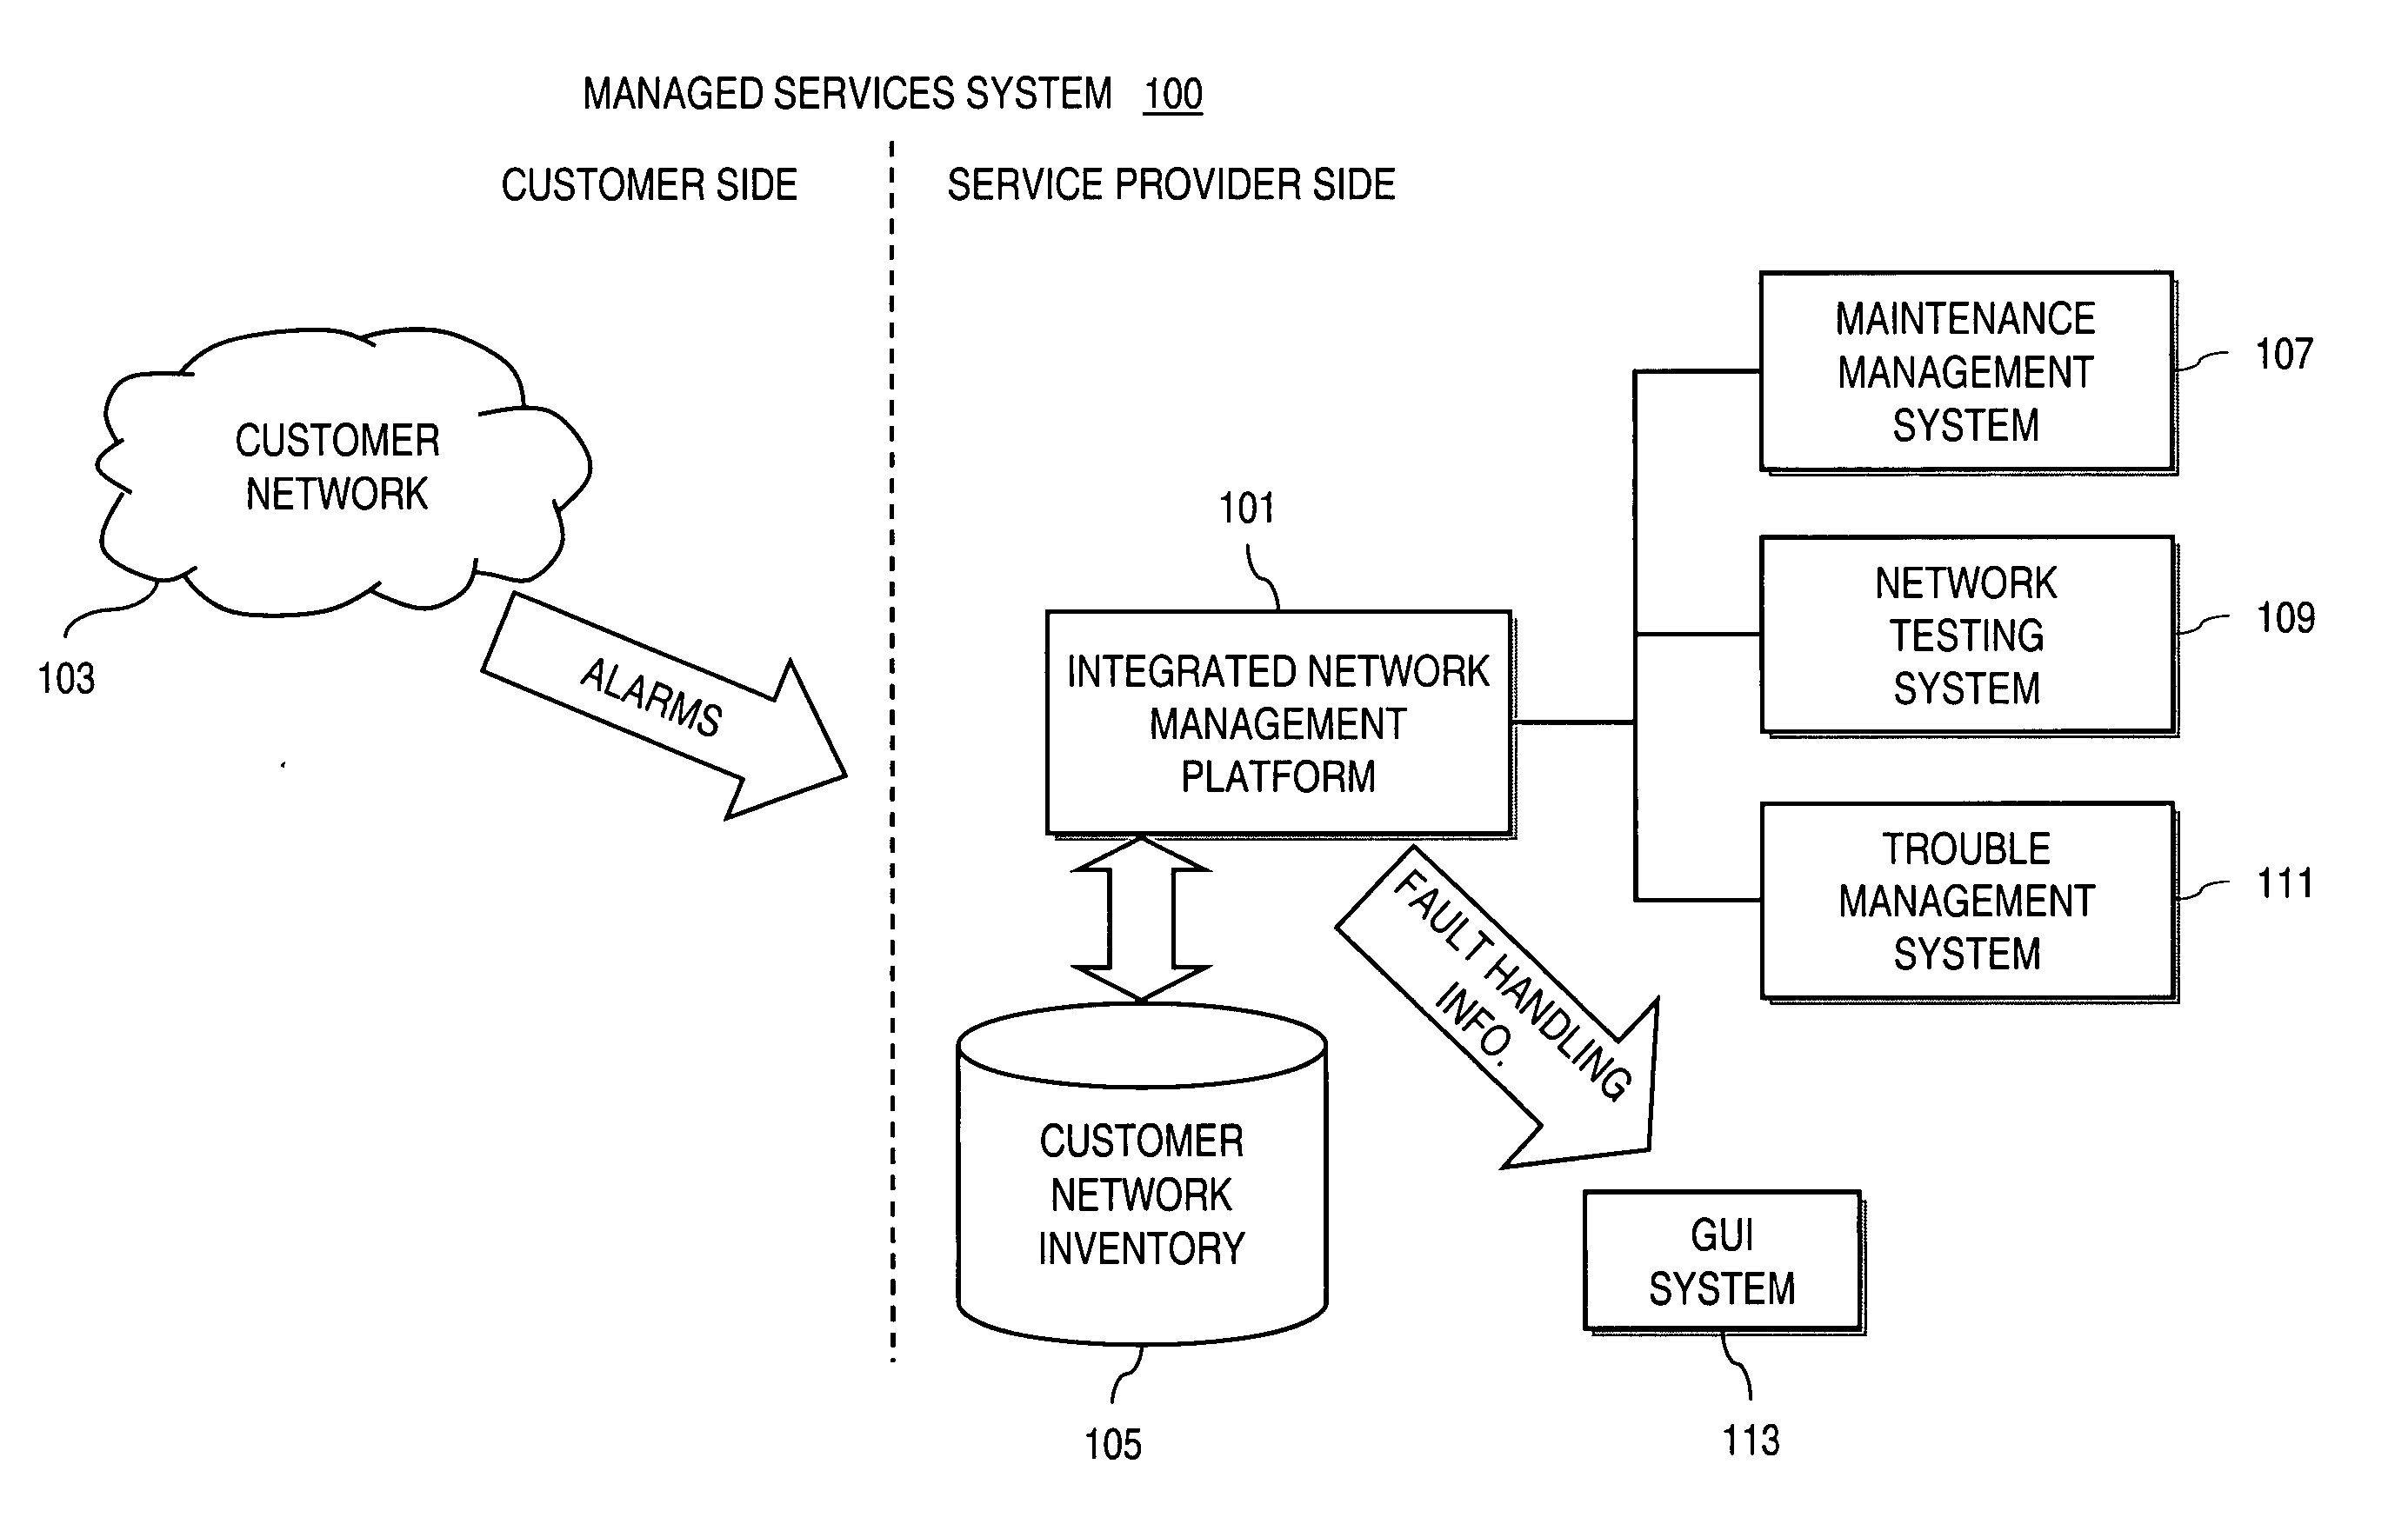 Method and system for providing automated data retrieval in support of fault isolation in a managed services network